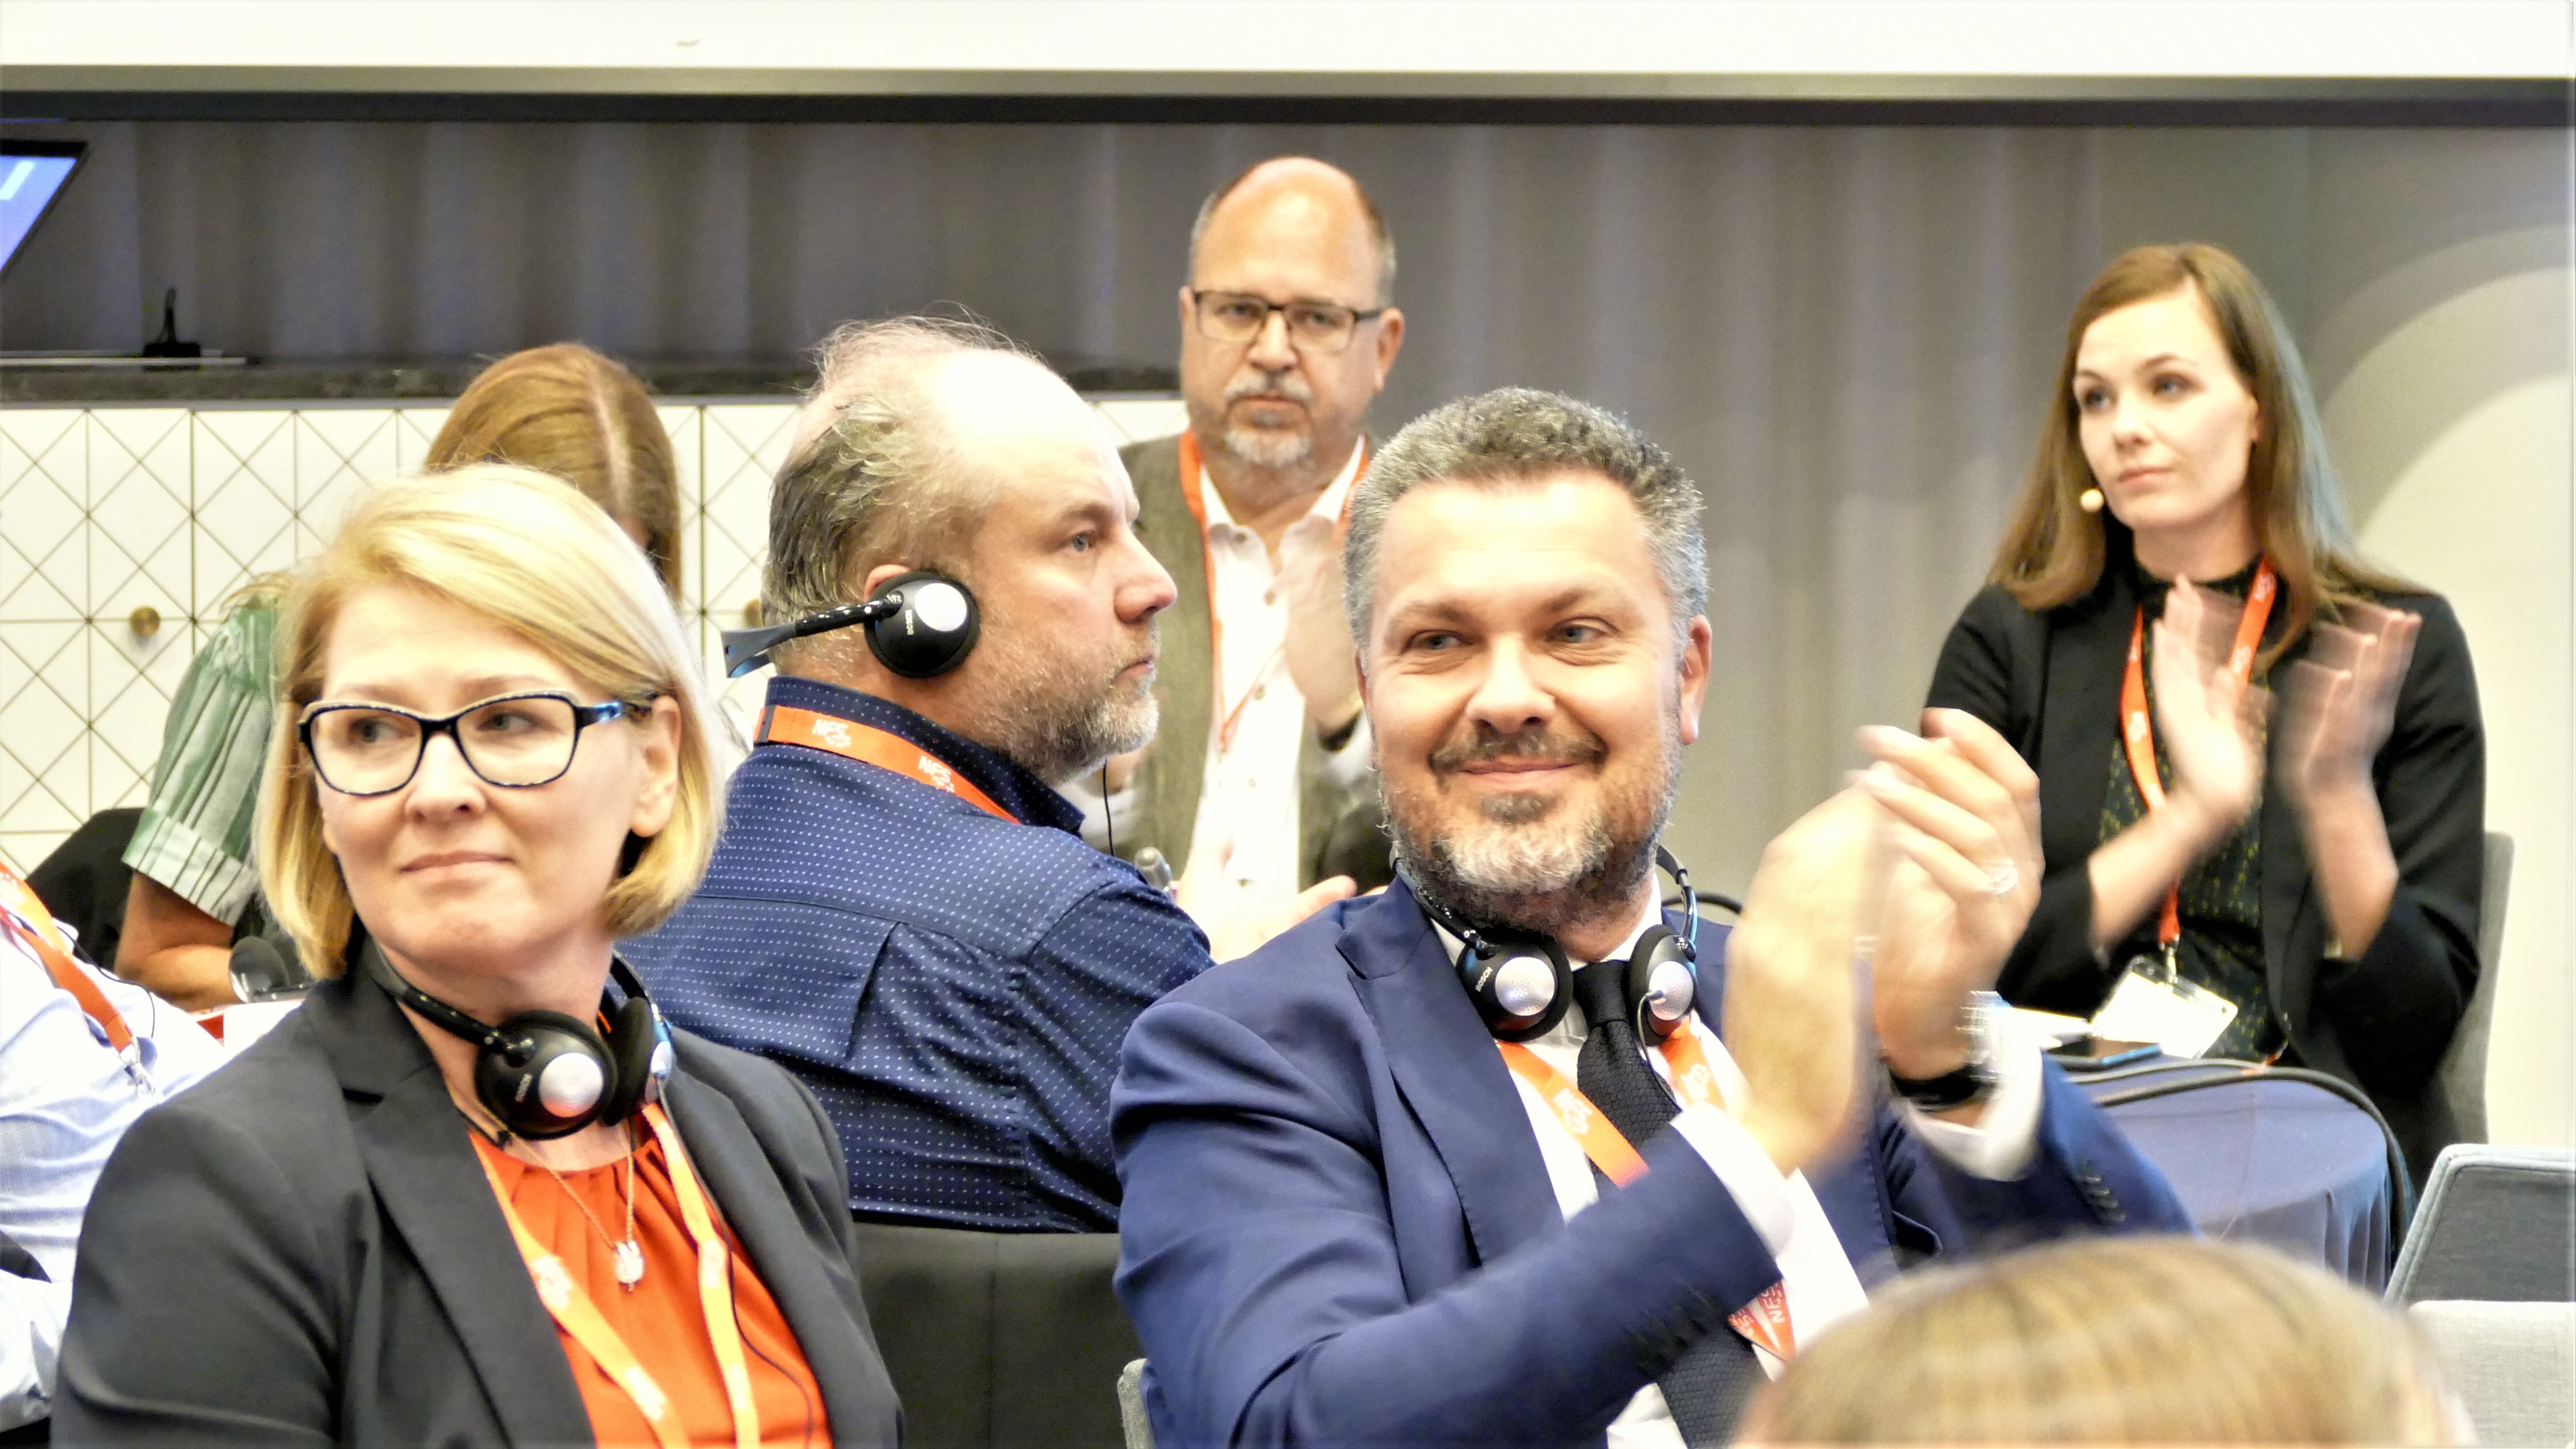 Nordic trade unions: climate action must be fair